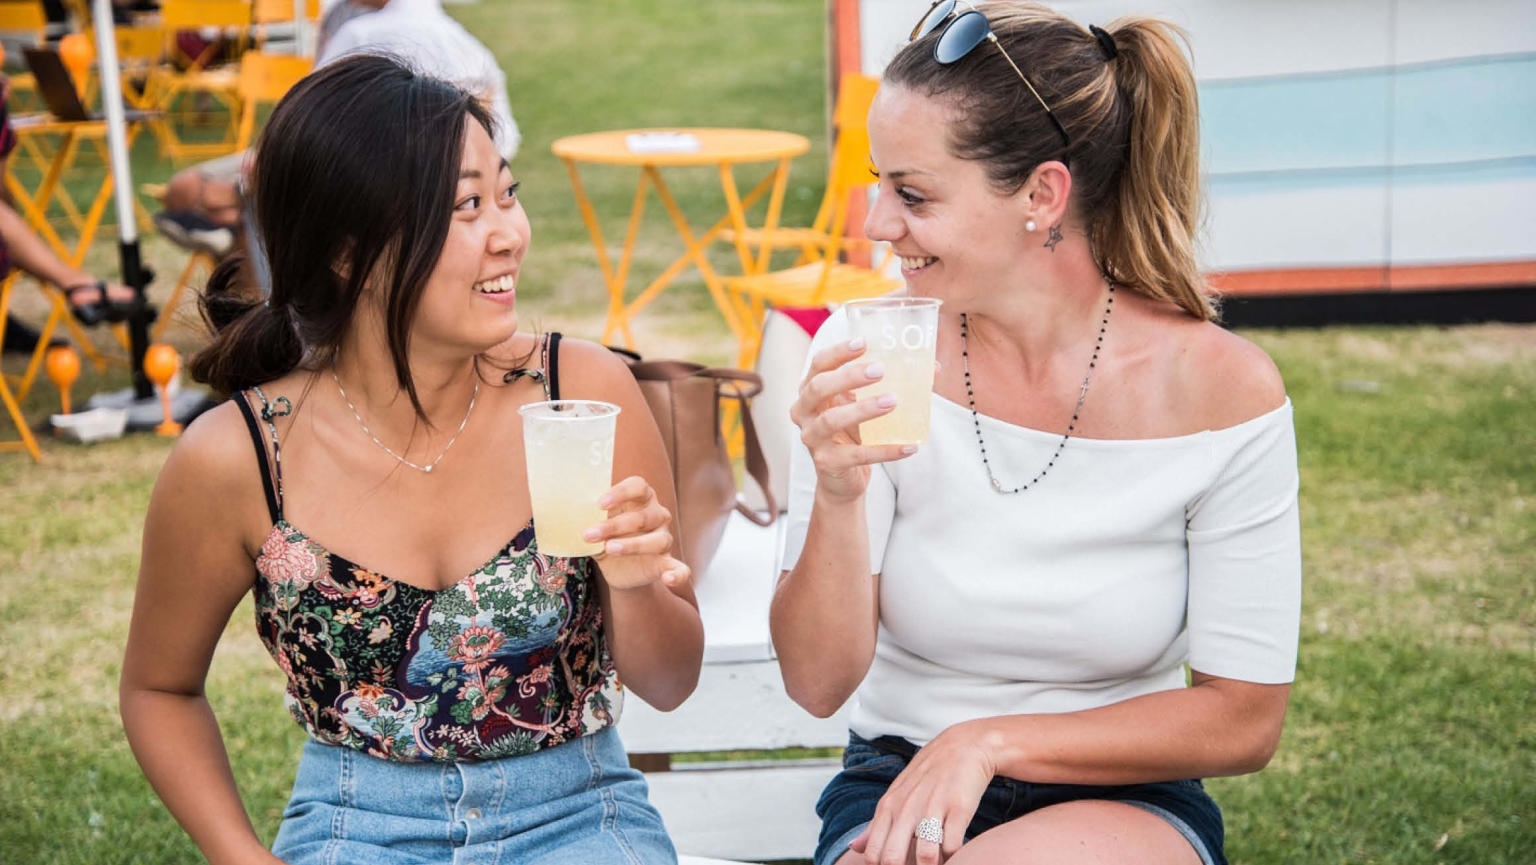 Two women seated outdoors, sharing a joyful moment as they gaze at each other with smiles, each holding a delightful light yellow beverage.